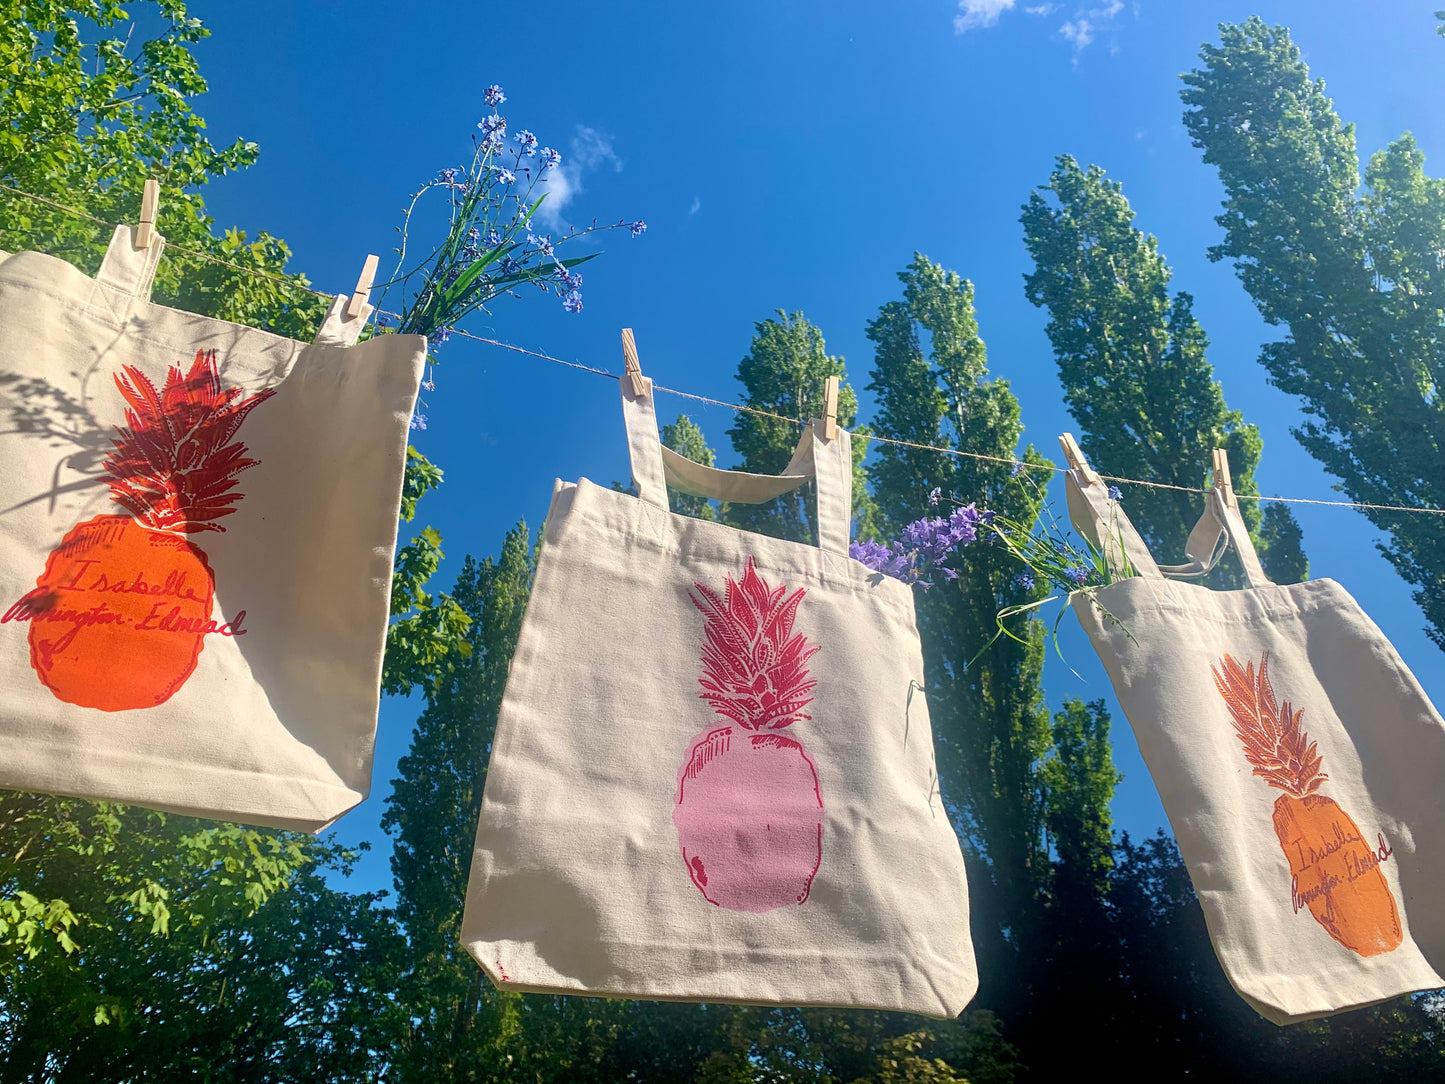 Special edition Pineapple canvas bags